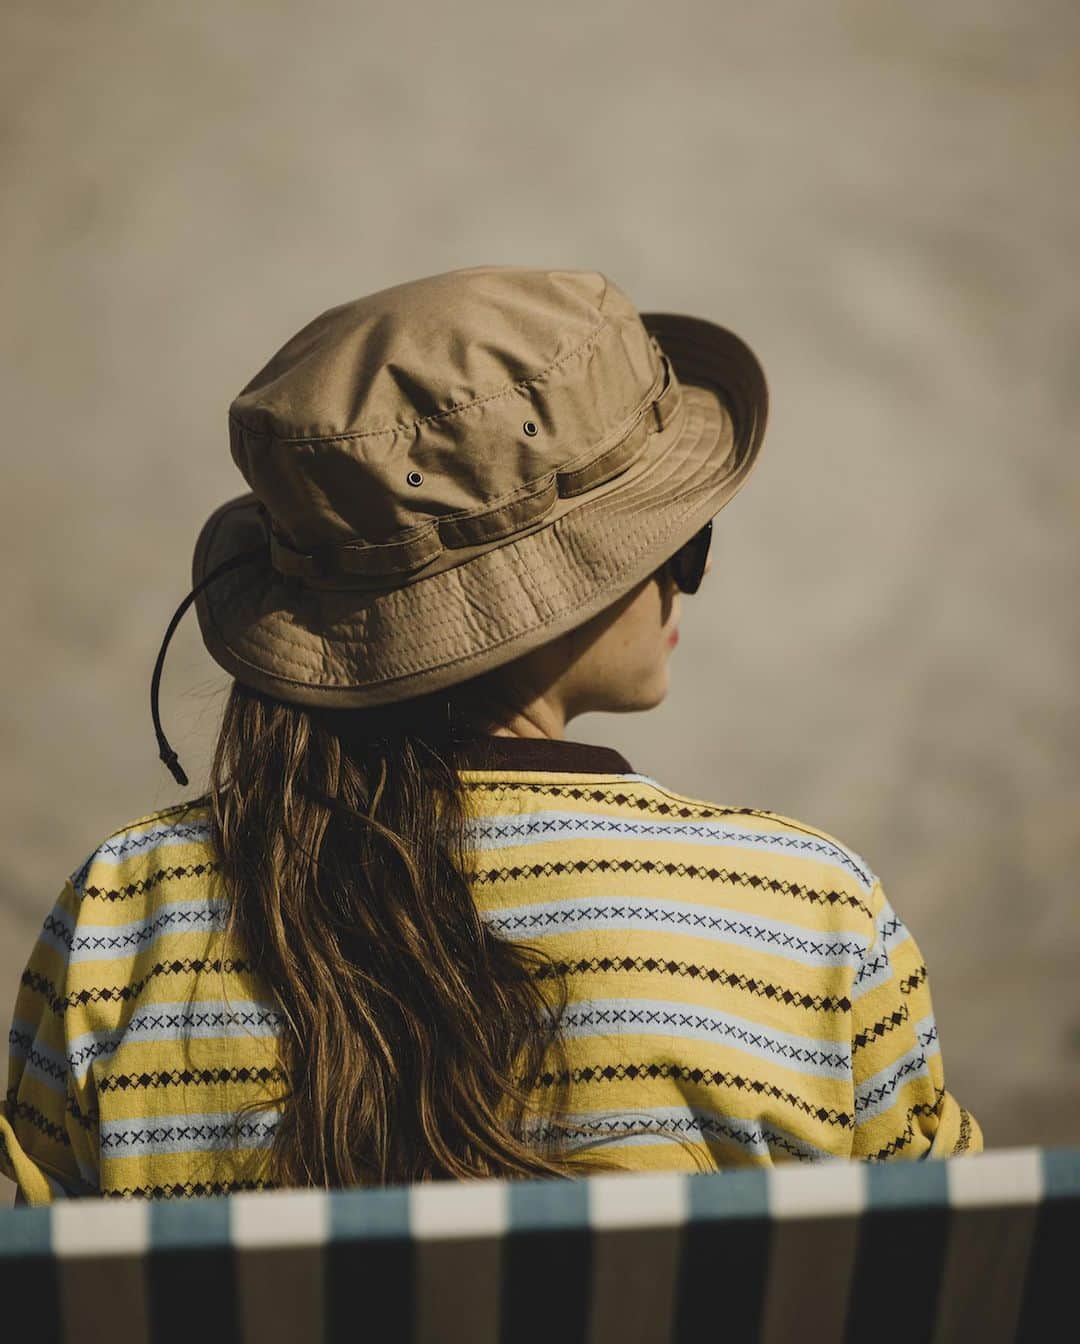 BEAMS+さんのインスタグラム写真 - (BEAMS+Instagram)「... Hope you love the laid-back vibe of BEAMS PLUS classic beachwear! ---------- ●Pocket Tee Pile Stripe A comfy T-shirt with a cool striped design, perfect for the beach. It's made from a mix of cotton and polyester for a soft feel.  ●Pocket Tee Jacquard Stripe This tee draws inspiration from vintage styles and features a unique jacquard stripe pattern created with special yarn.  ●B.D. Double Gauze Enjoy the breezy and soft feel of this gauze material, which has a lovely textured finish.  ●MIL 1 Pleat Athletic Shorts These shorts are designed with a touch of vintage charm, made from smooth nylon taffeta, and inspired by U.S. Navy swim shorts.  快適な着心地と洗練されたスタイル、BEAMS PLUSのクラシックなビーチウェア。 ---------- ● Pocket Tee Pile Stripe 海が似合うパイル素材とストライプ。コットンとポリエステルの混紡生地を使用。パイル地のループ長を短く設定し、パイル特有の重みを軽減。肌触りと着心地を考えたパイルTシャツ。  ● Pocket Tee Jacquard Stripe ビンテージ Tシャツから着想し、オリジナルで編み立てたジャカードストライプ。40番双糸を使い、4色の先染め糸で編みあげています。  ● B.D. Double Gauze 柔らかで通気性に富むガーゼ素材。生地染めを行うことでふっくらとした風合いに仕上げています。   ● MIL 1 Pleat Athletic Shorts 50デニールナイロンタフタを使用。ヴィンテージ感のある微光沢のナイロンは、もちろんオリジナルファブリック。 U.S.NAVYのスイムショーツをベースにデザインしたモデルです。 . @beams_plus @beams_plus_harajuku @beams_plus_yurakucho #beamsplus」8月8日 20時03分 - beams_plus_harajuku